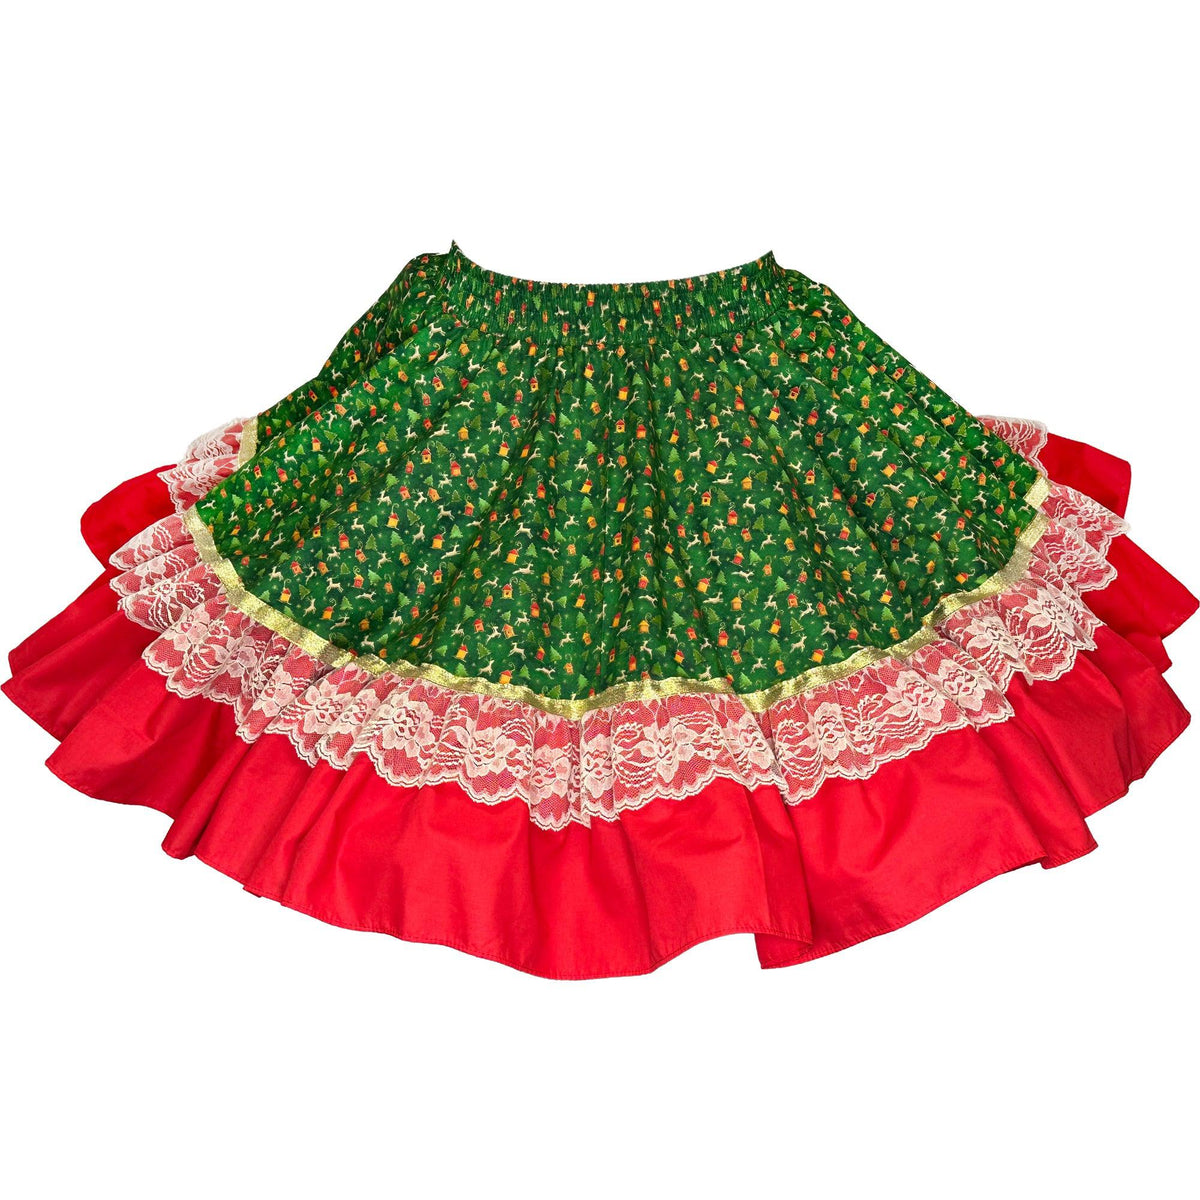 A Reindeer Square Dance Skirt with lace trim in festive green and red from Square Up Fashions.